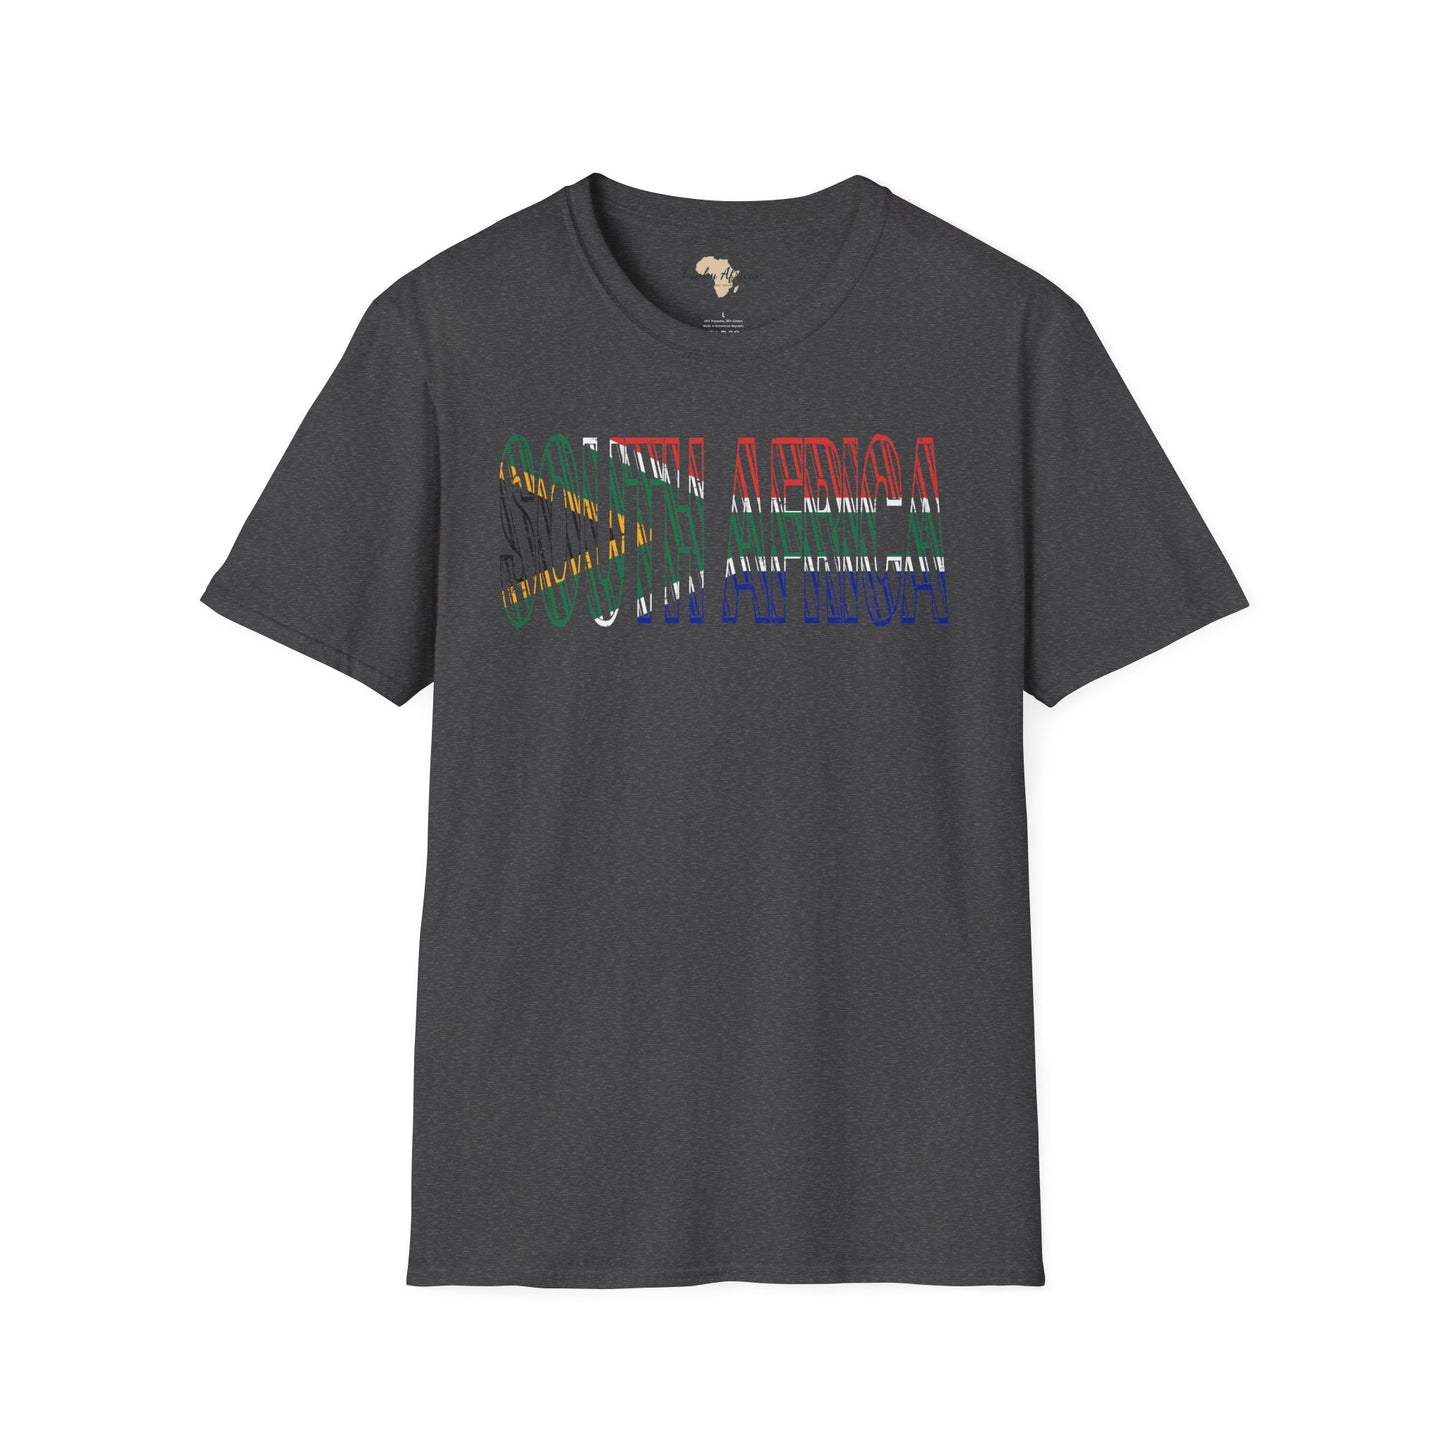 South African text unisex softstyle tee